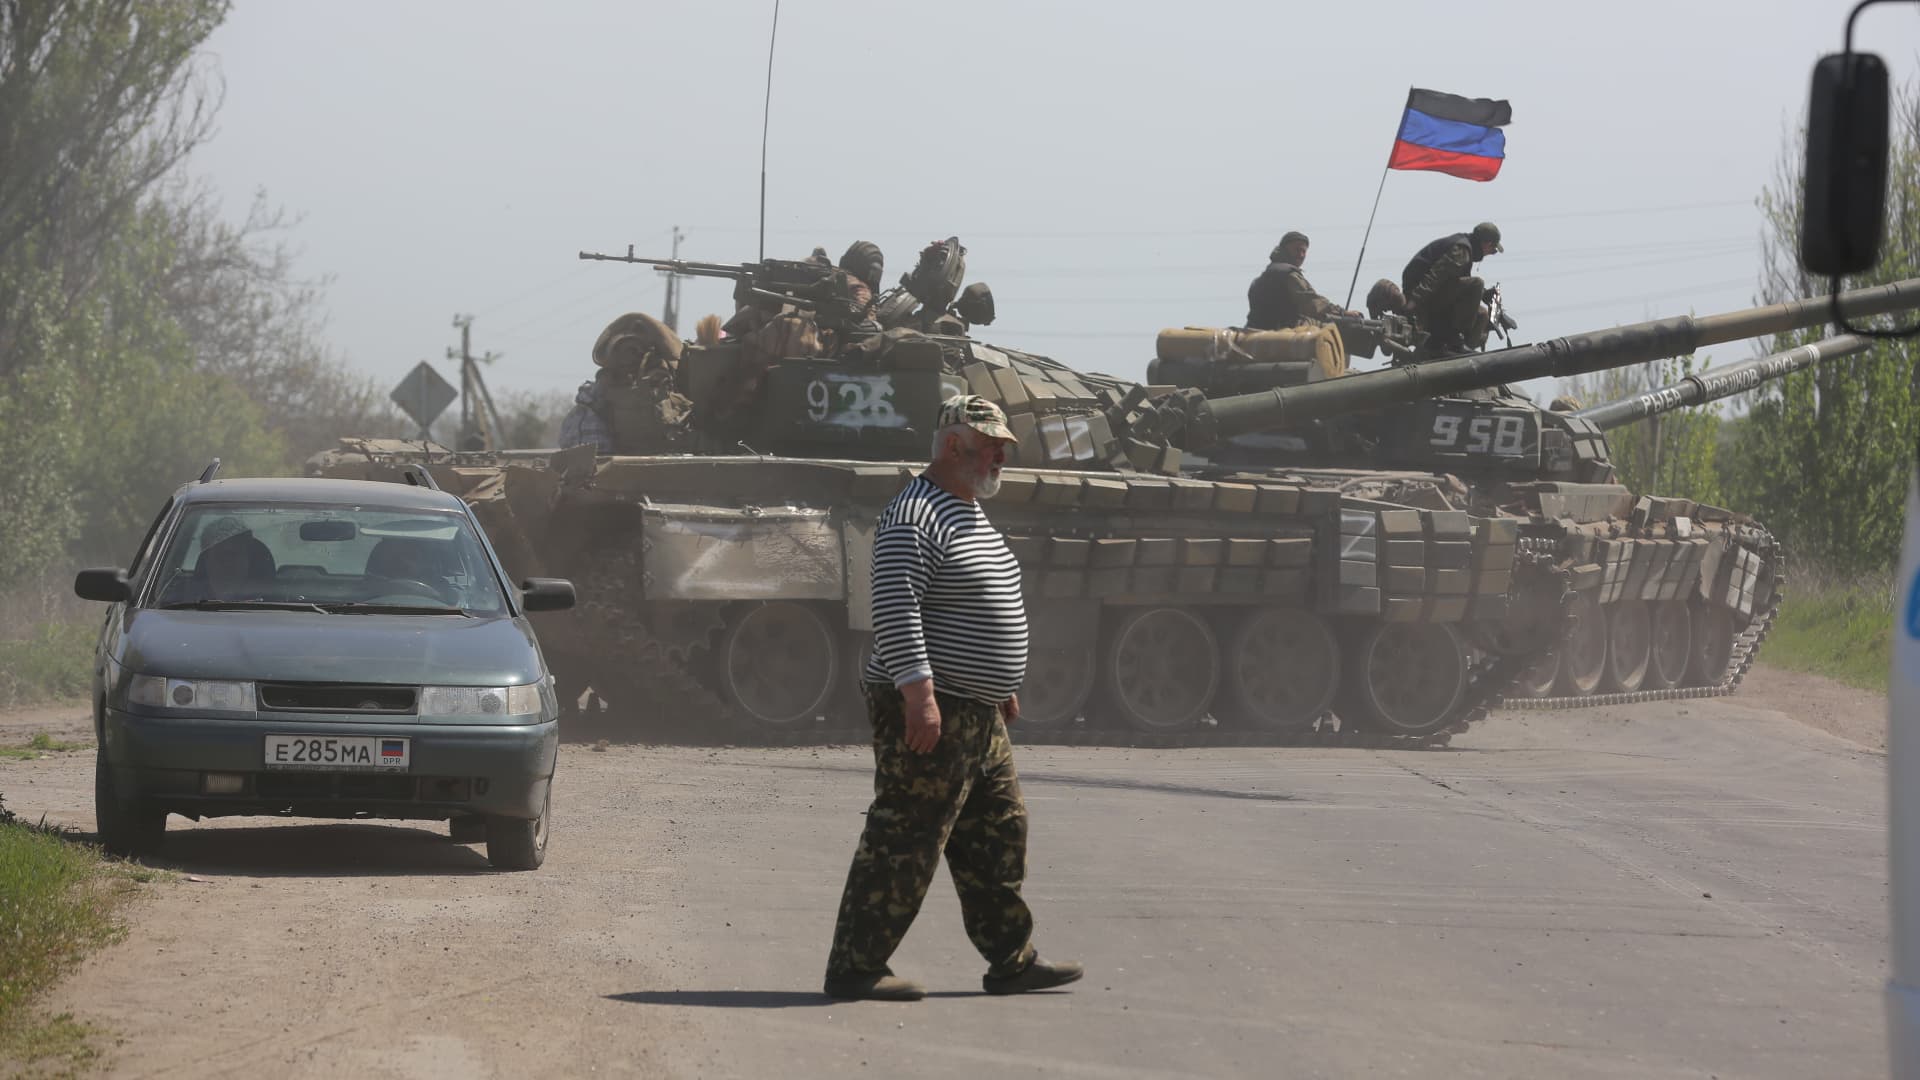 Tanks of the DPR army move on the road during several dozen Ukrainian civilians, who had been living in the bomb shelters of the Azovstal plant for more than a month, being evacuated in Mariupol, Ukraine on May 06, 2022.